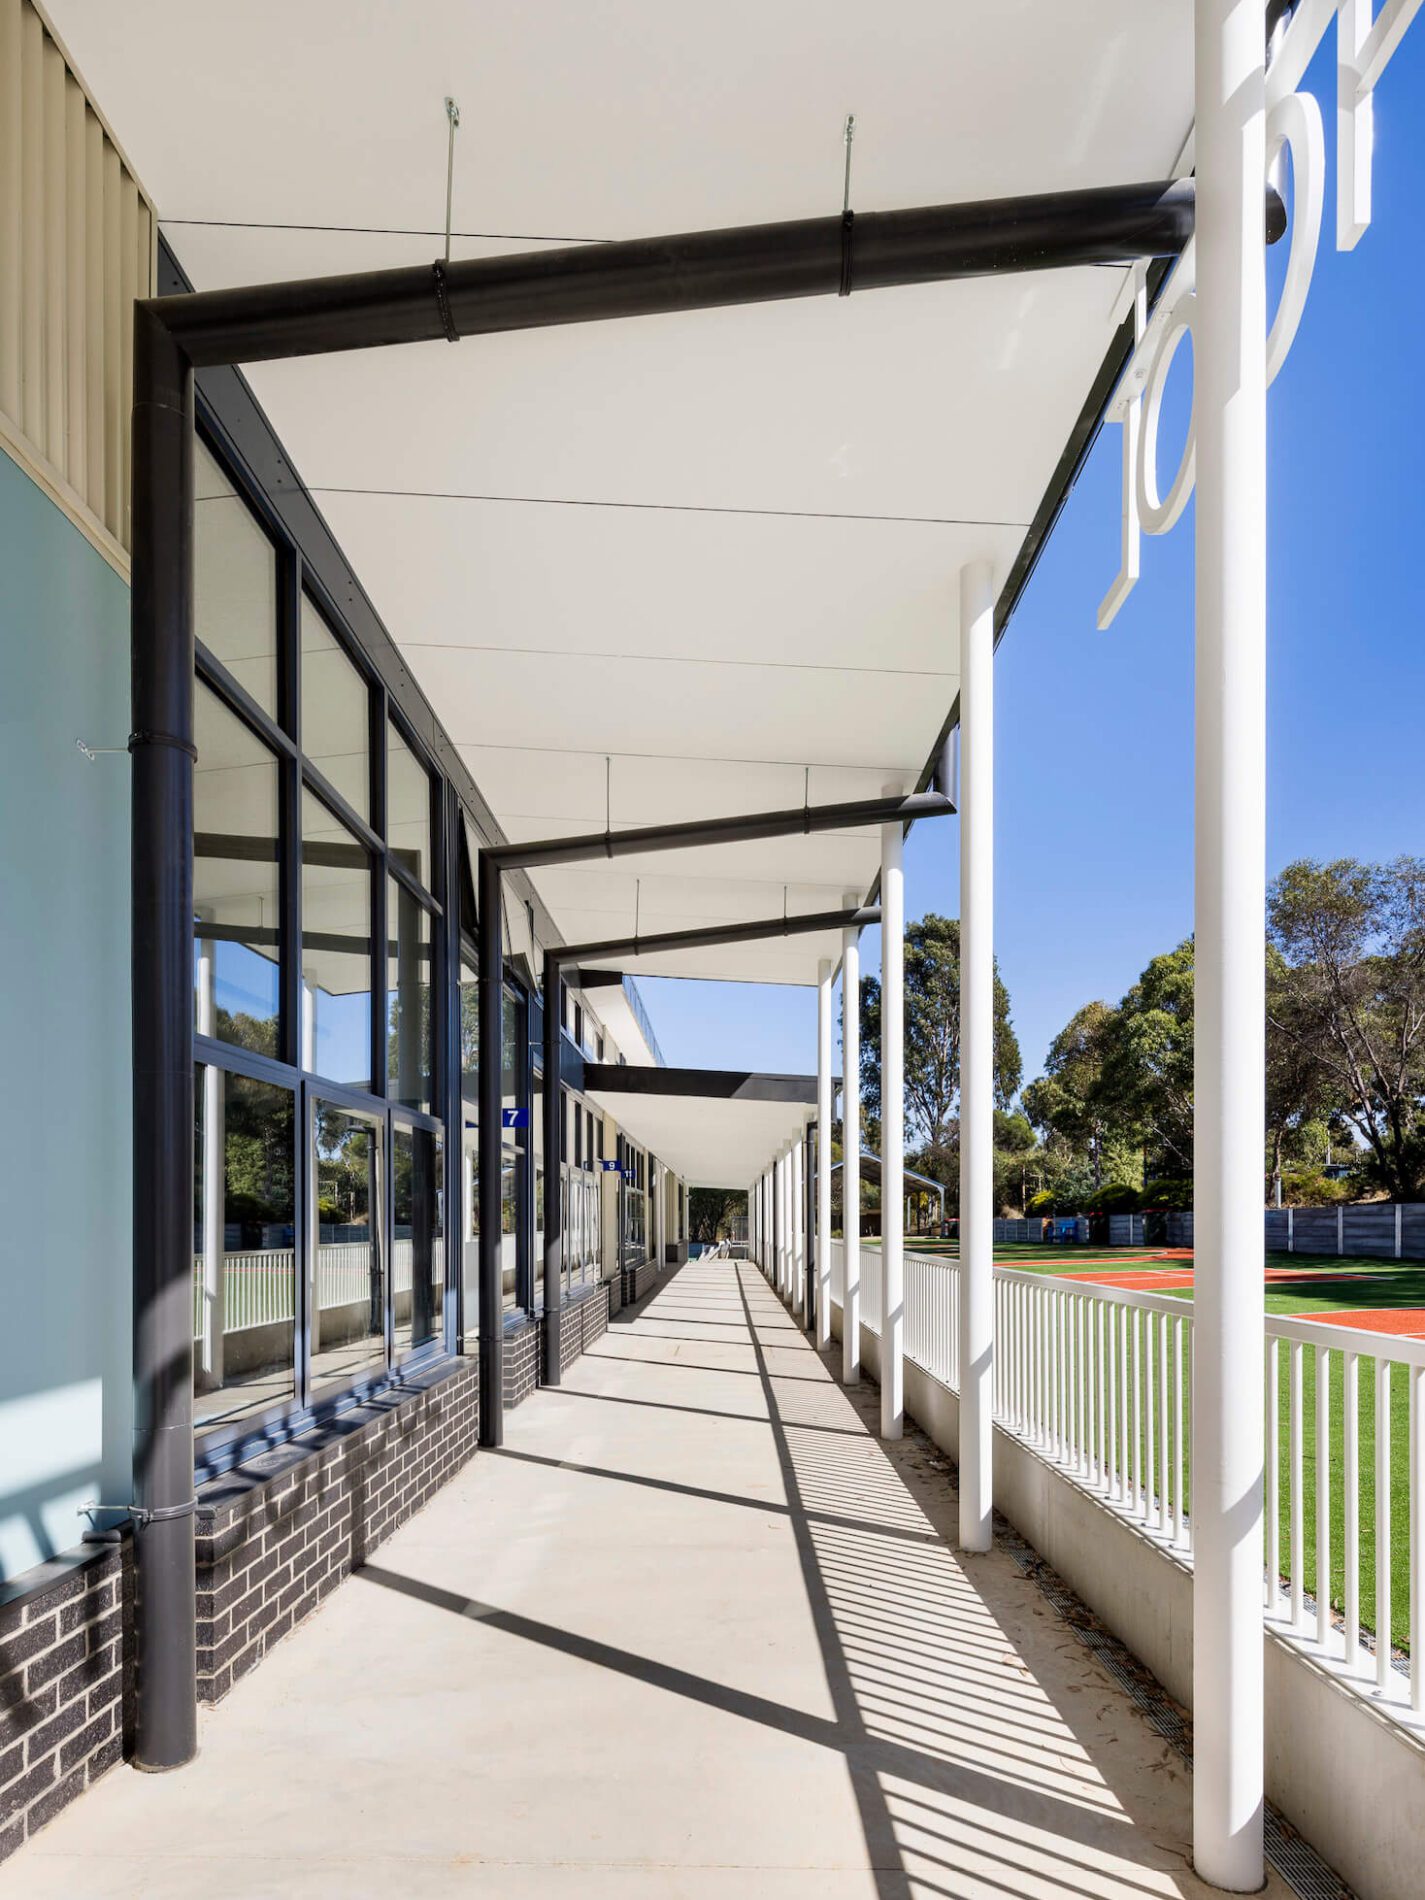 Covered outdoor school walkway with white poles and black trim windows, next to turfed area.